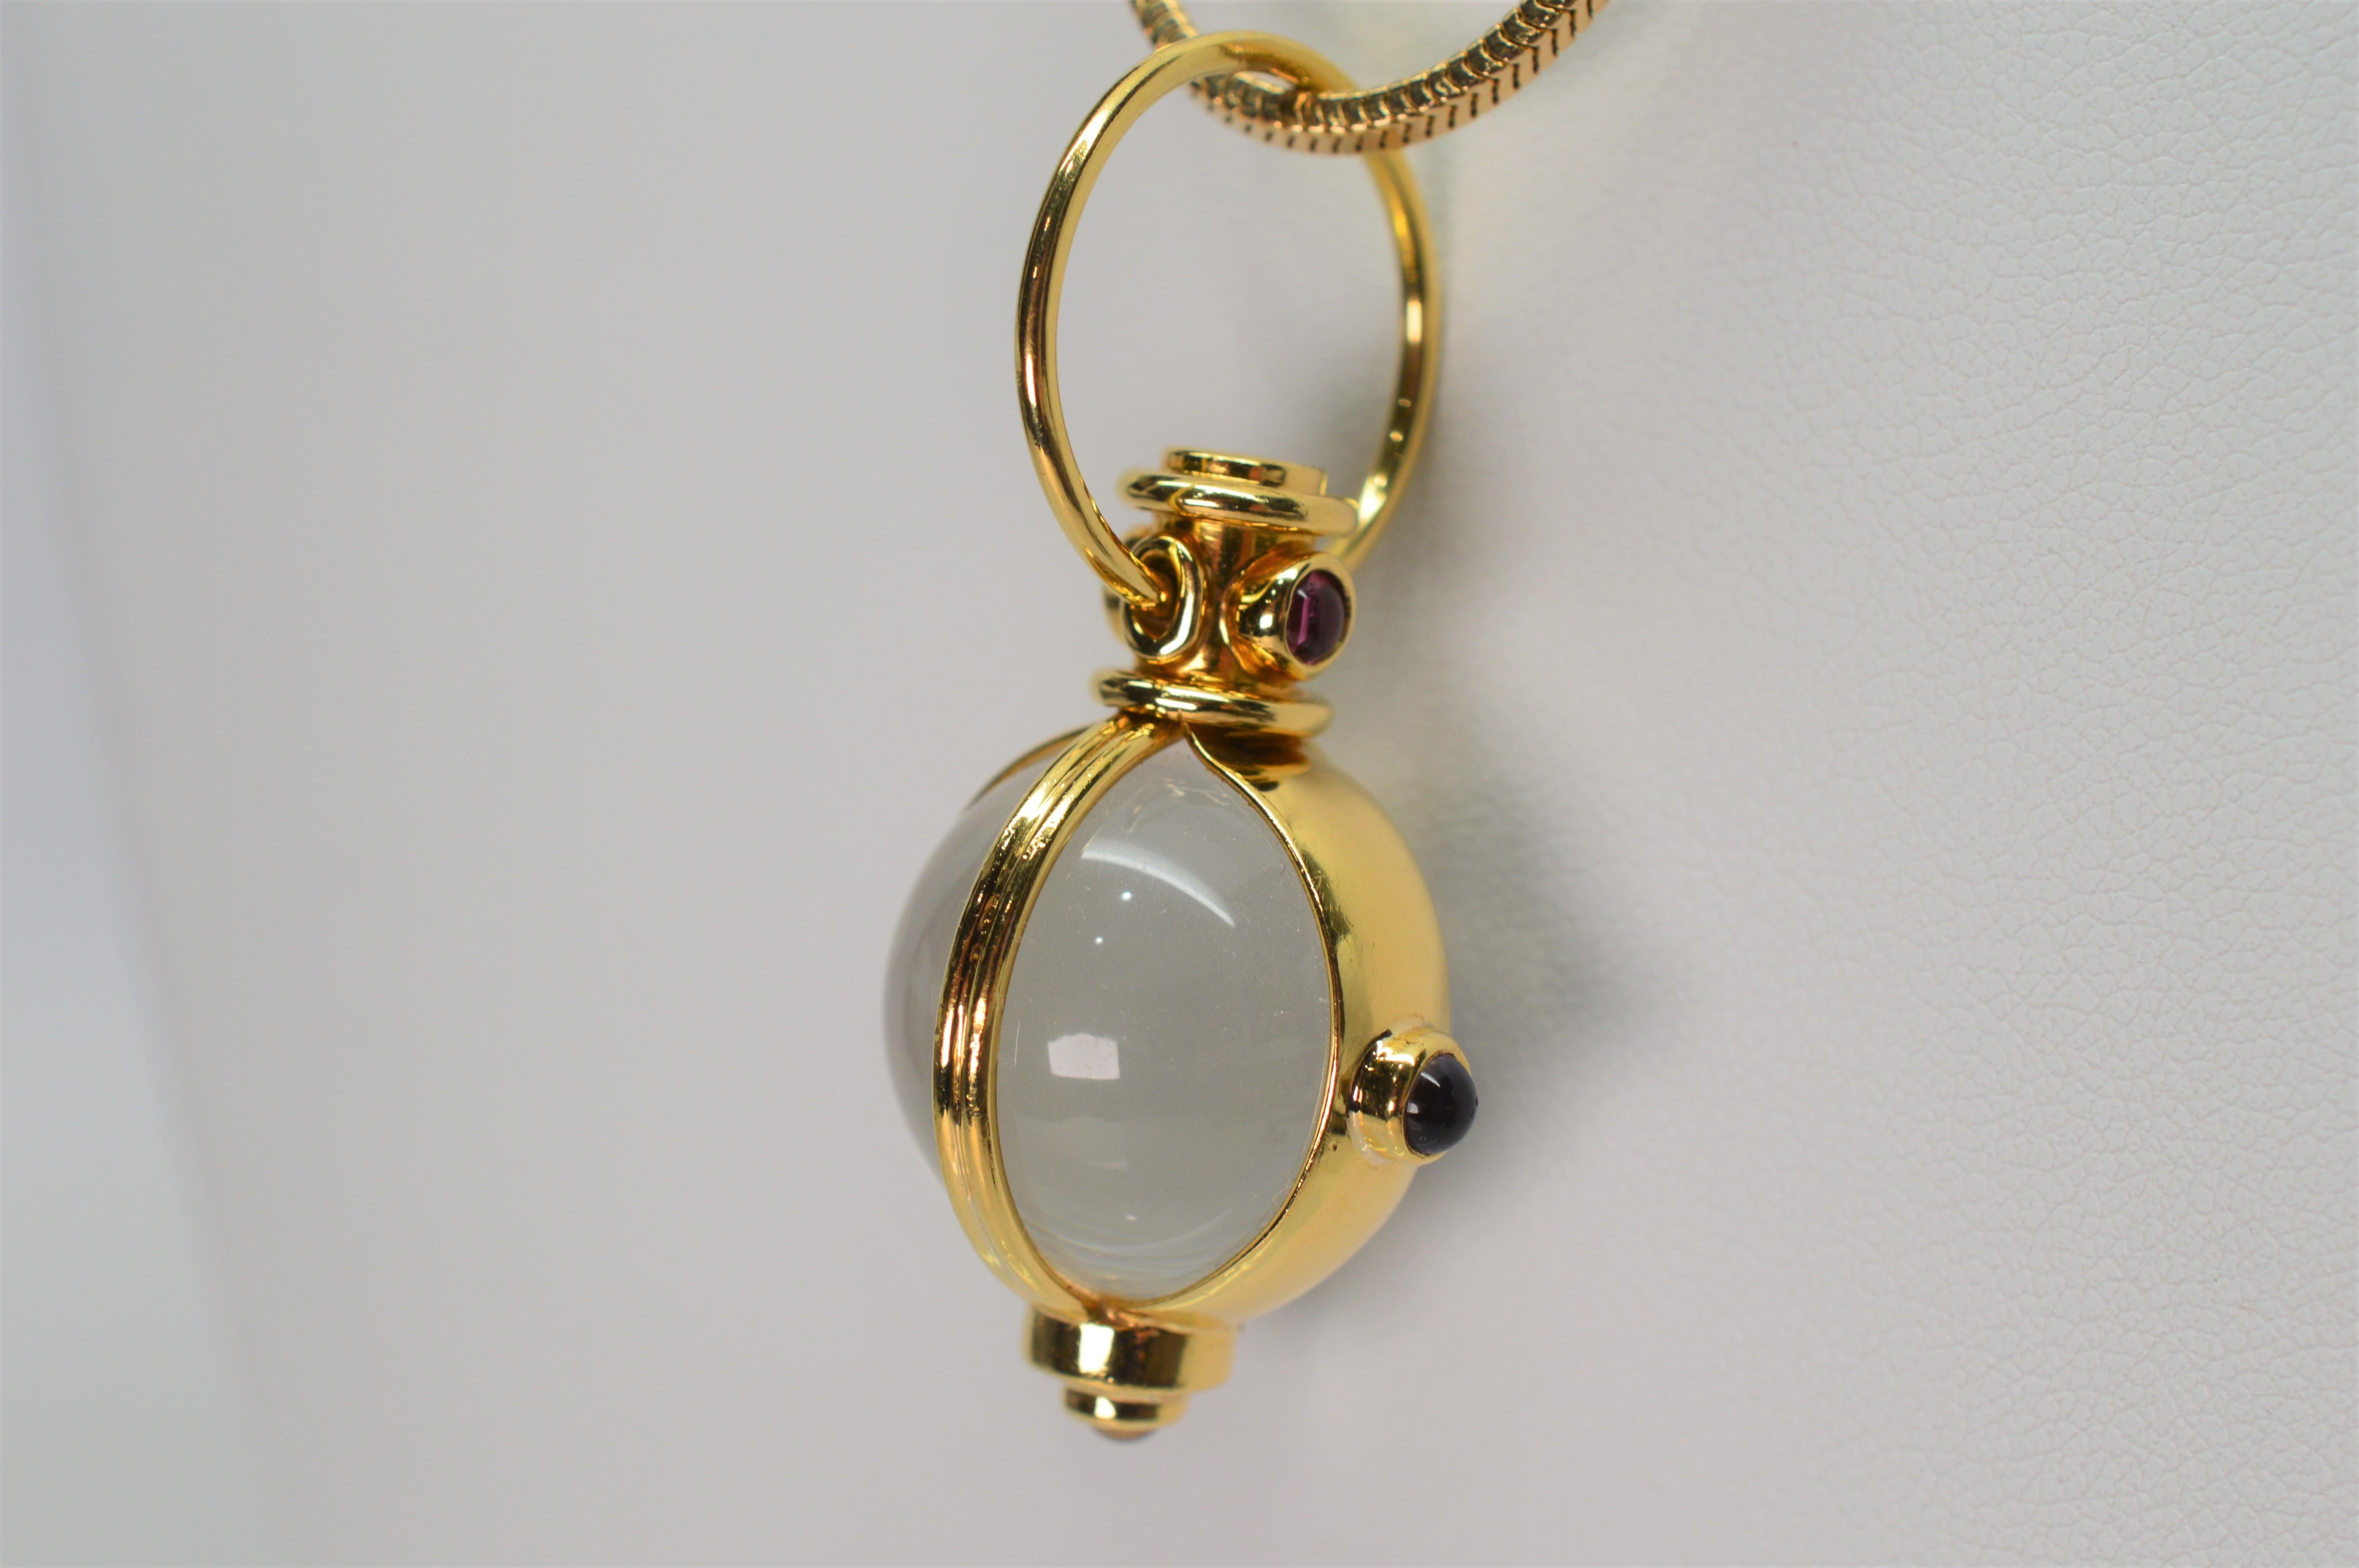 Feel the mystic of this quartz crystal sphere secured in a Gothic inspired eighteen karat (18K) yellow gold charm pendant adorned with rivets of quartz, peridot and amethyst gemstone. The brilliant pendant plays with light as it suspends on a